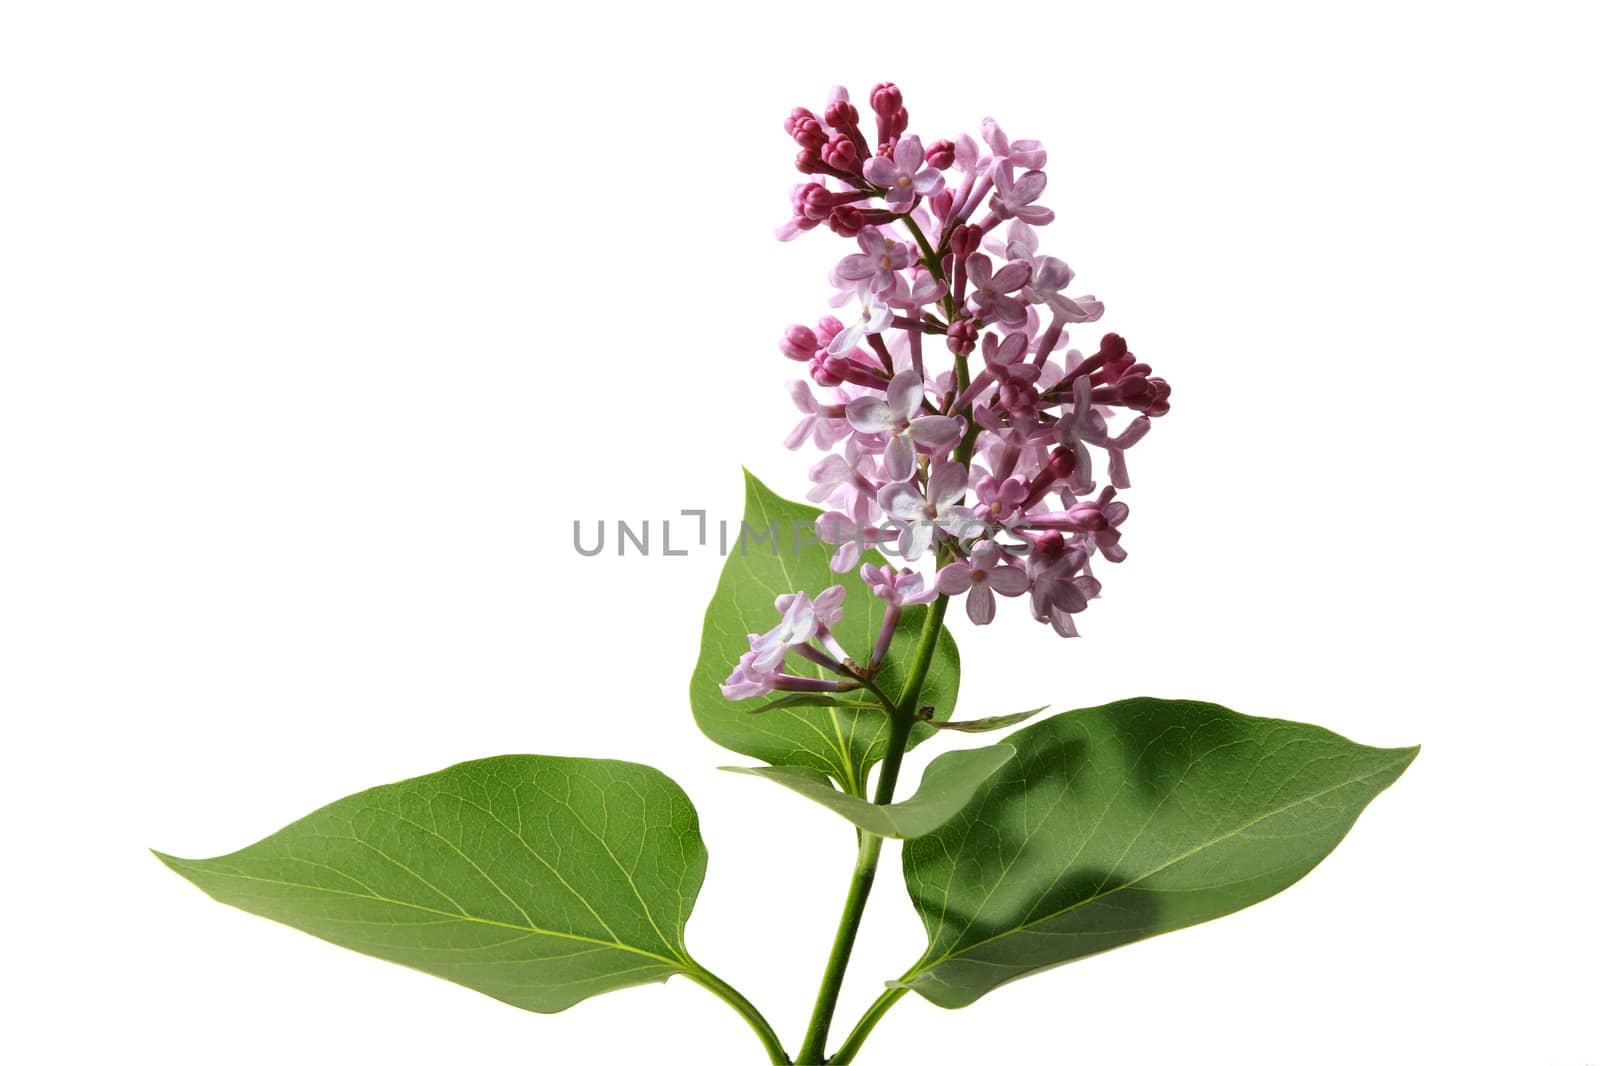 Blossoming branch of a lilac on a white background